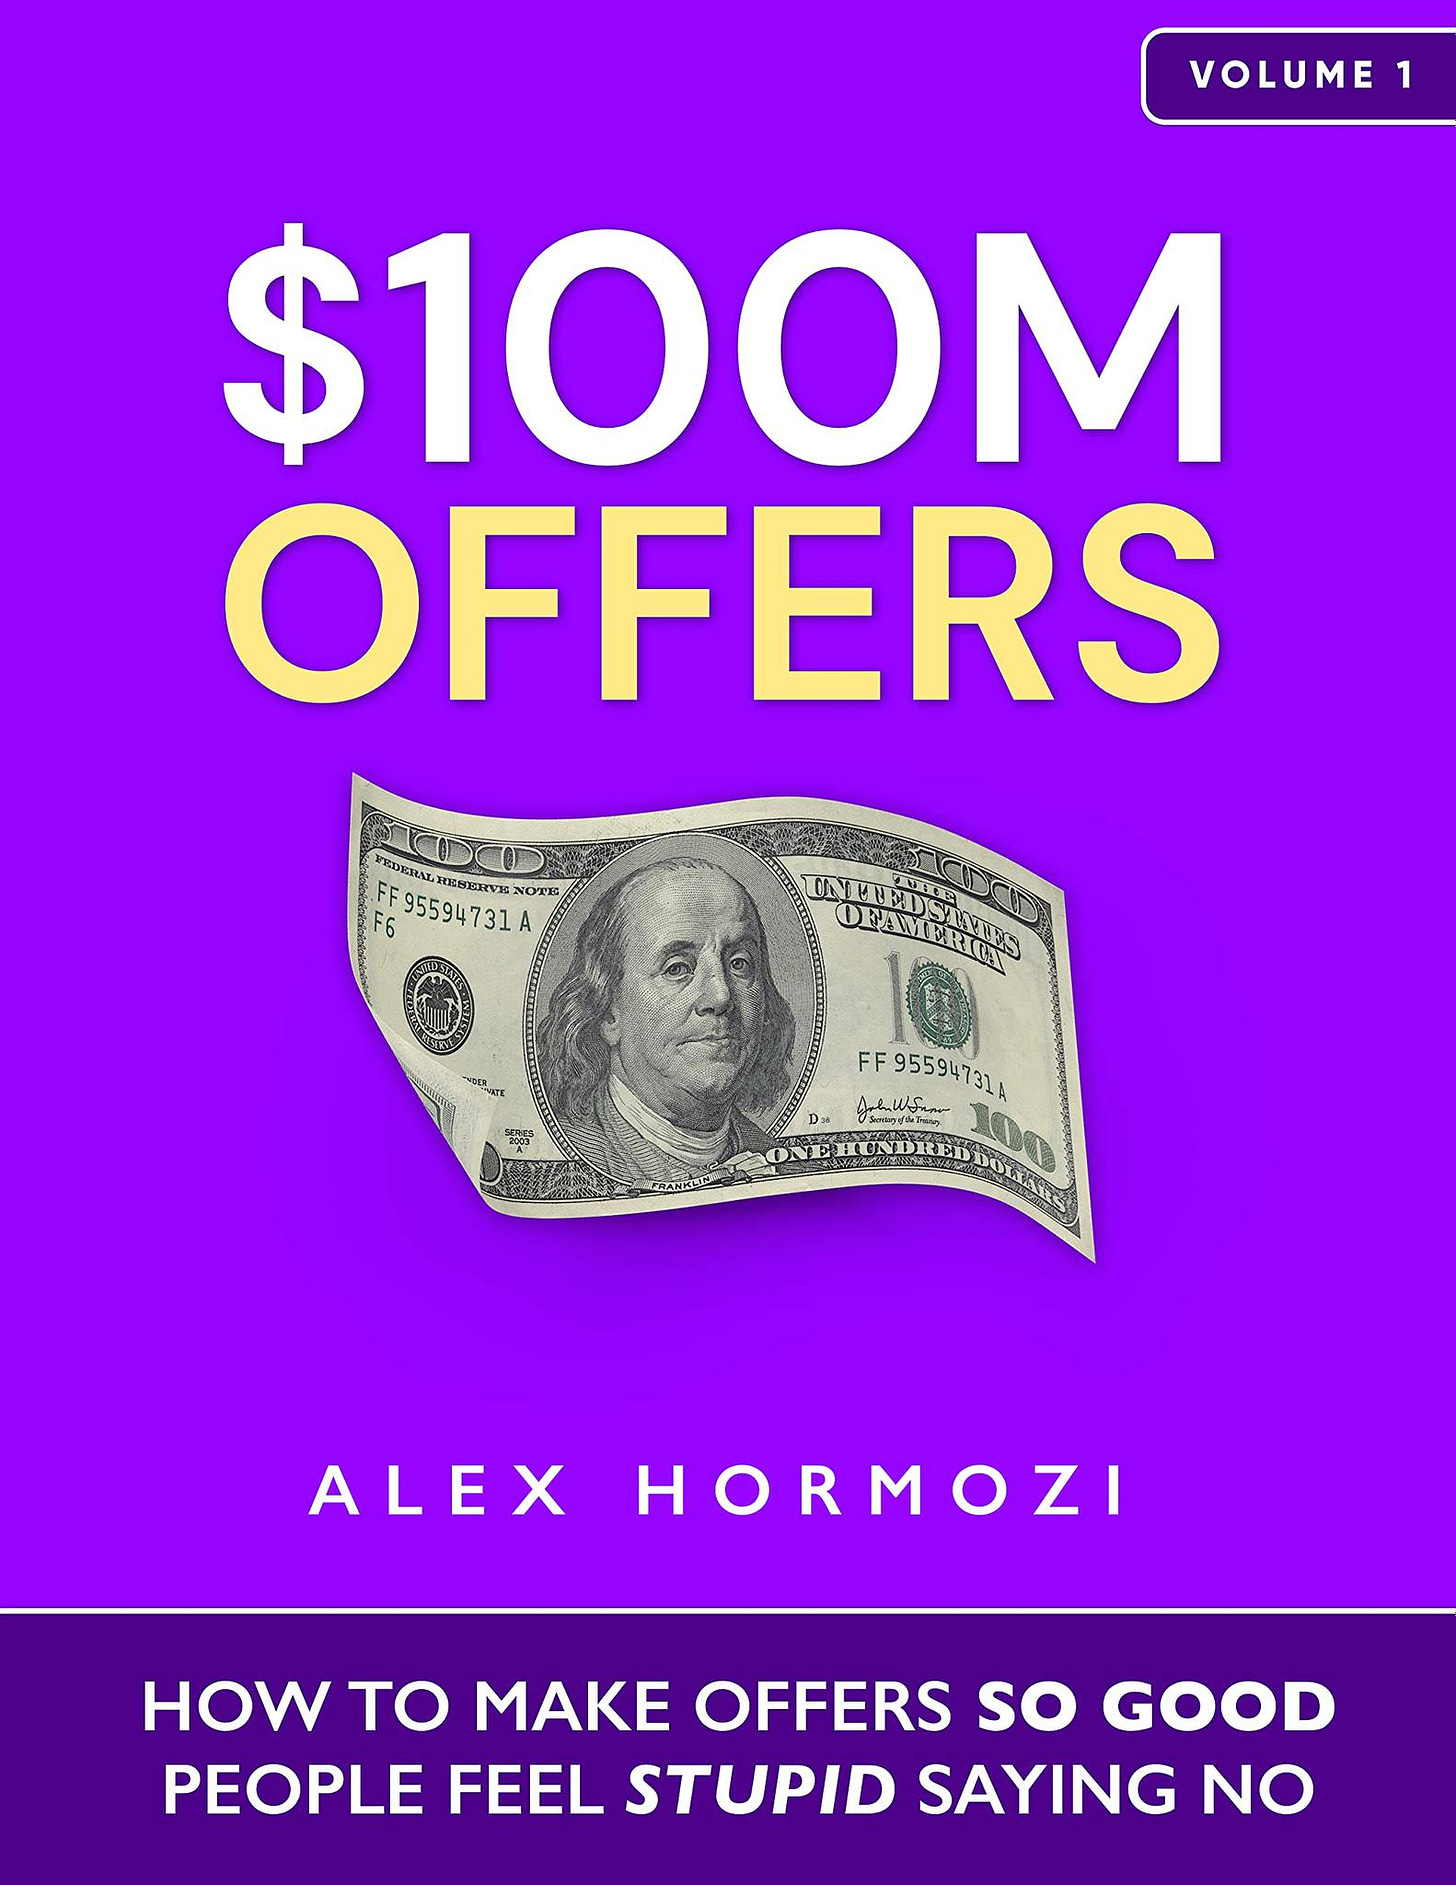 May be a graphic of money and text that says "VOLUME $100M OFFERS 95594731 FF95594731 JrenllSnn 100 ALEX HORMOZI HOW TO MAKE OFFERS So GOOD PEOPLE FEEL STUPID SAYING NO"